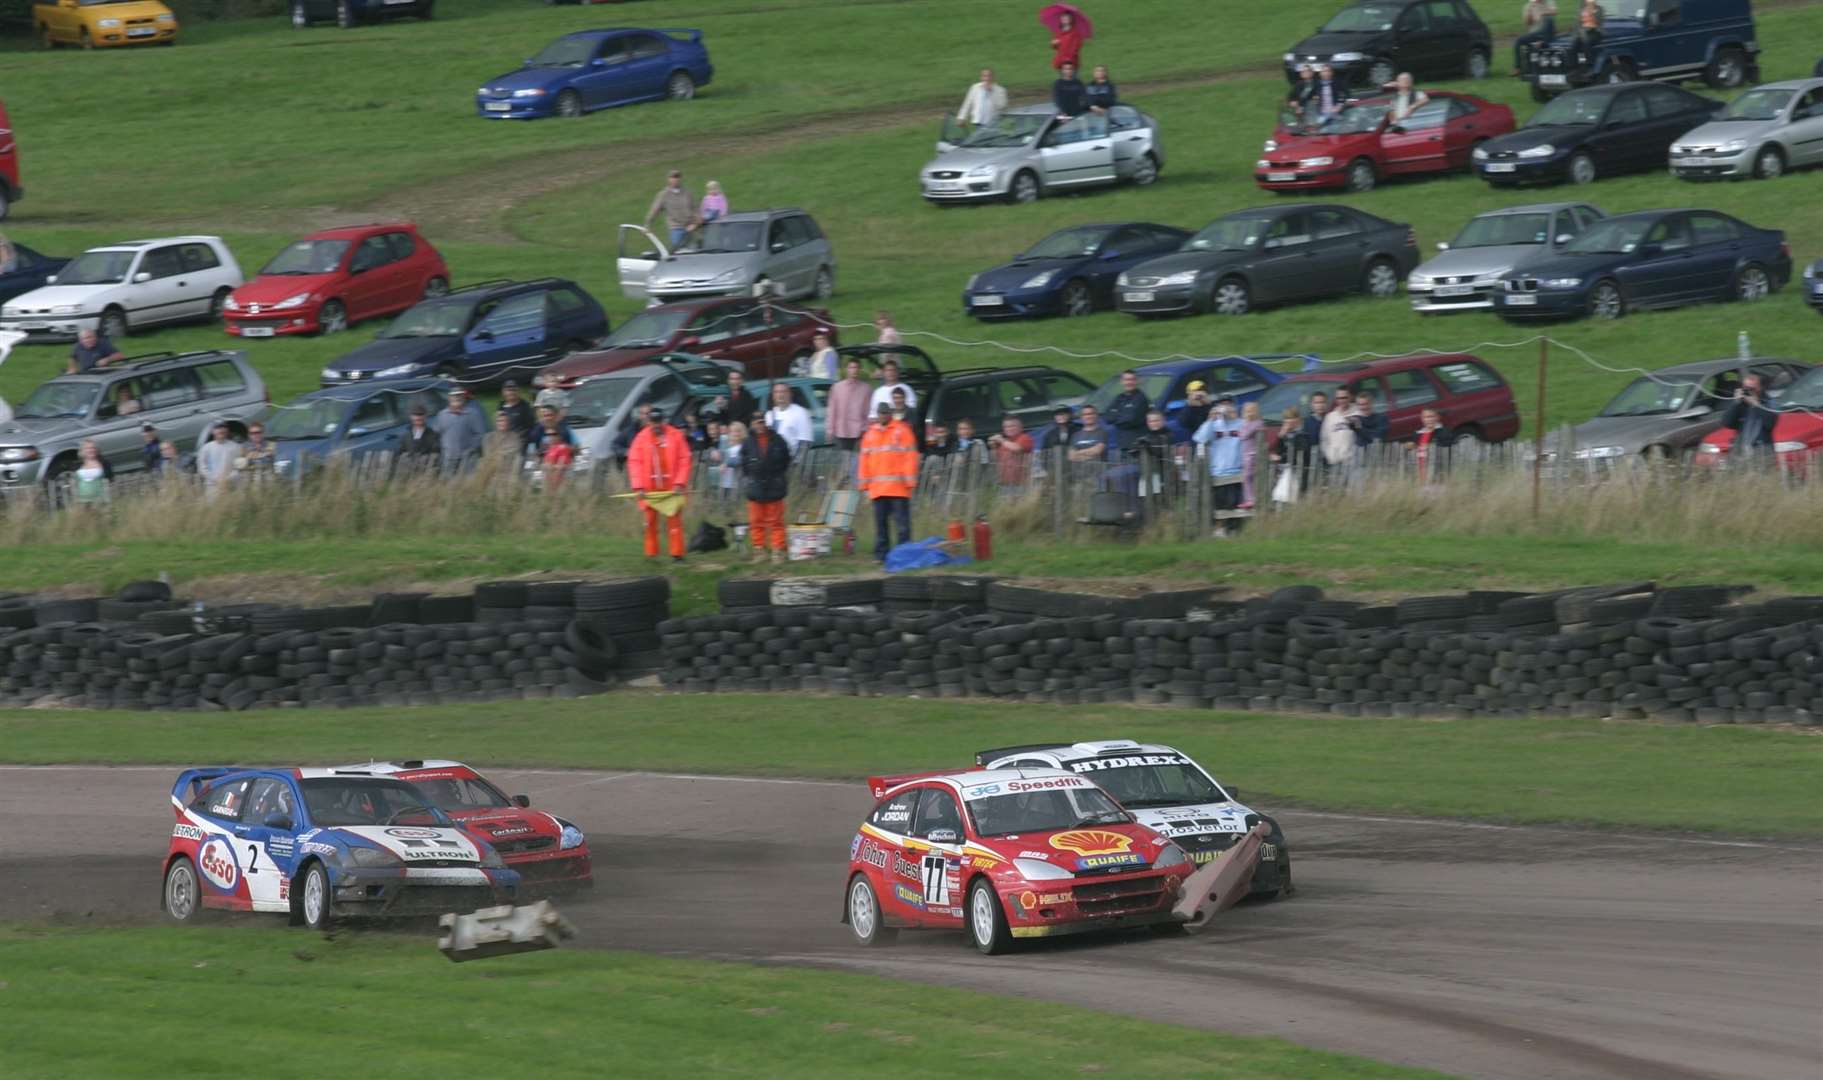 Andrew Jordan (77) sends the course markers flying as he sweeps past Pat Doran, while Dermot Carnegie (2) and John McCluskey dispute fourth place in the British Rallycross 'A' final at Lydden in August 2006. Picture: Kerry Dunlop